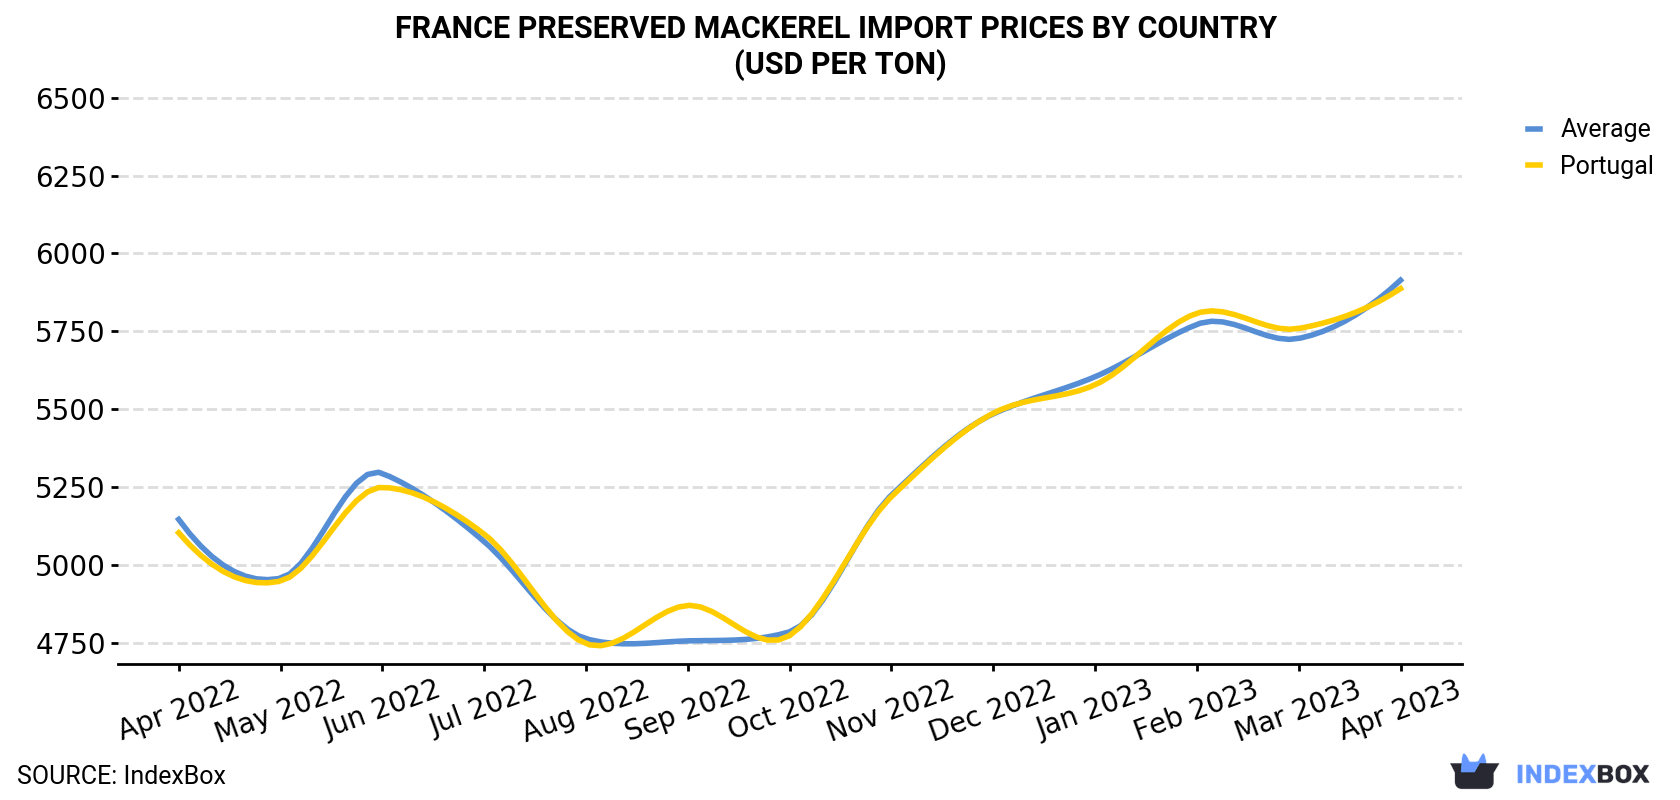 France Preserved Mackerel Import Prices By Country (USD Per Ton)